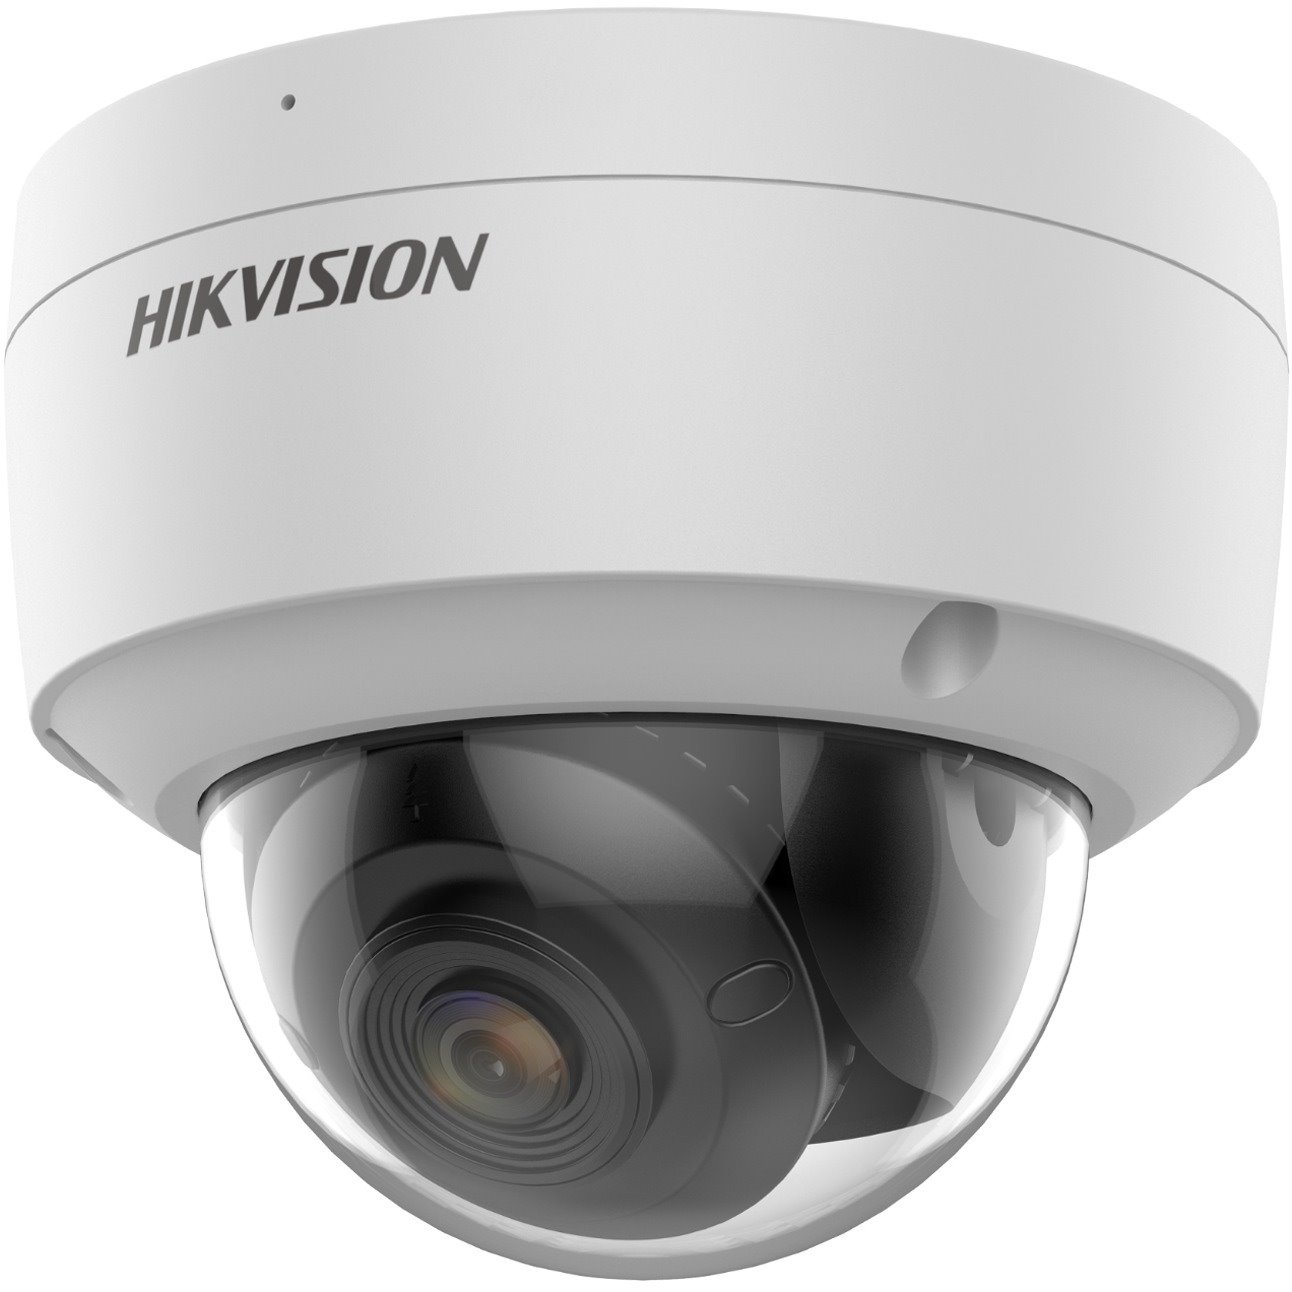 Hikvision EasyIP DS-2CD2147G2-SU 4 Megapixel Outdoor Network Camera - Color - Dome